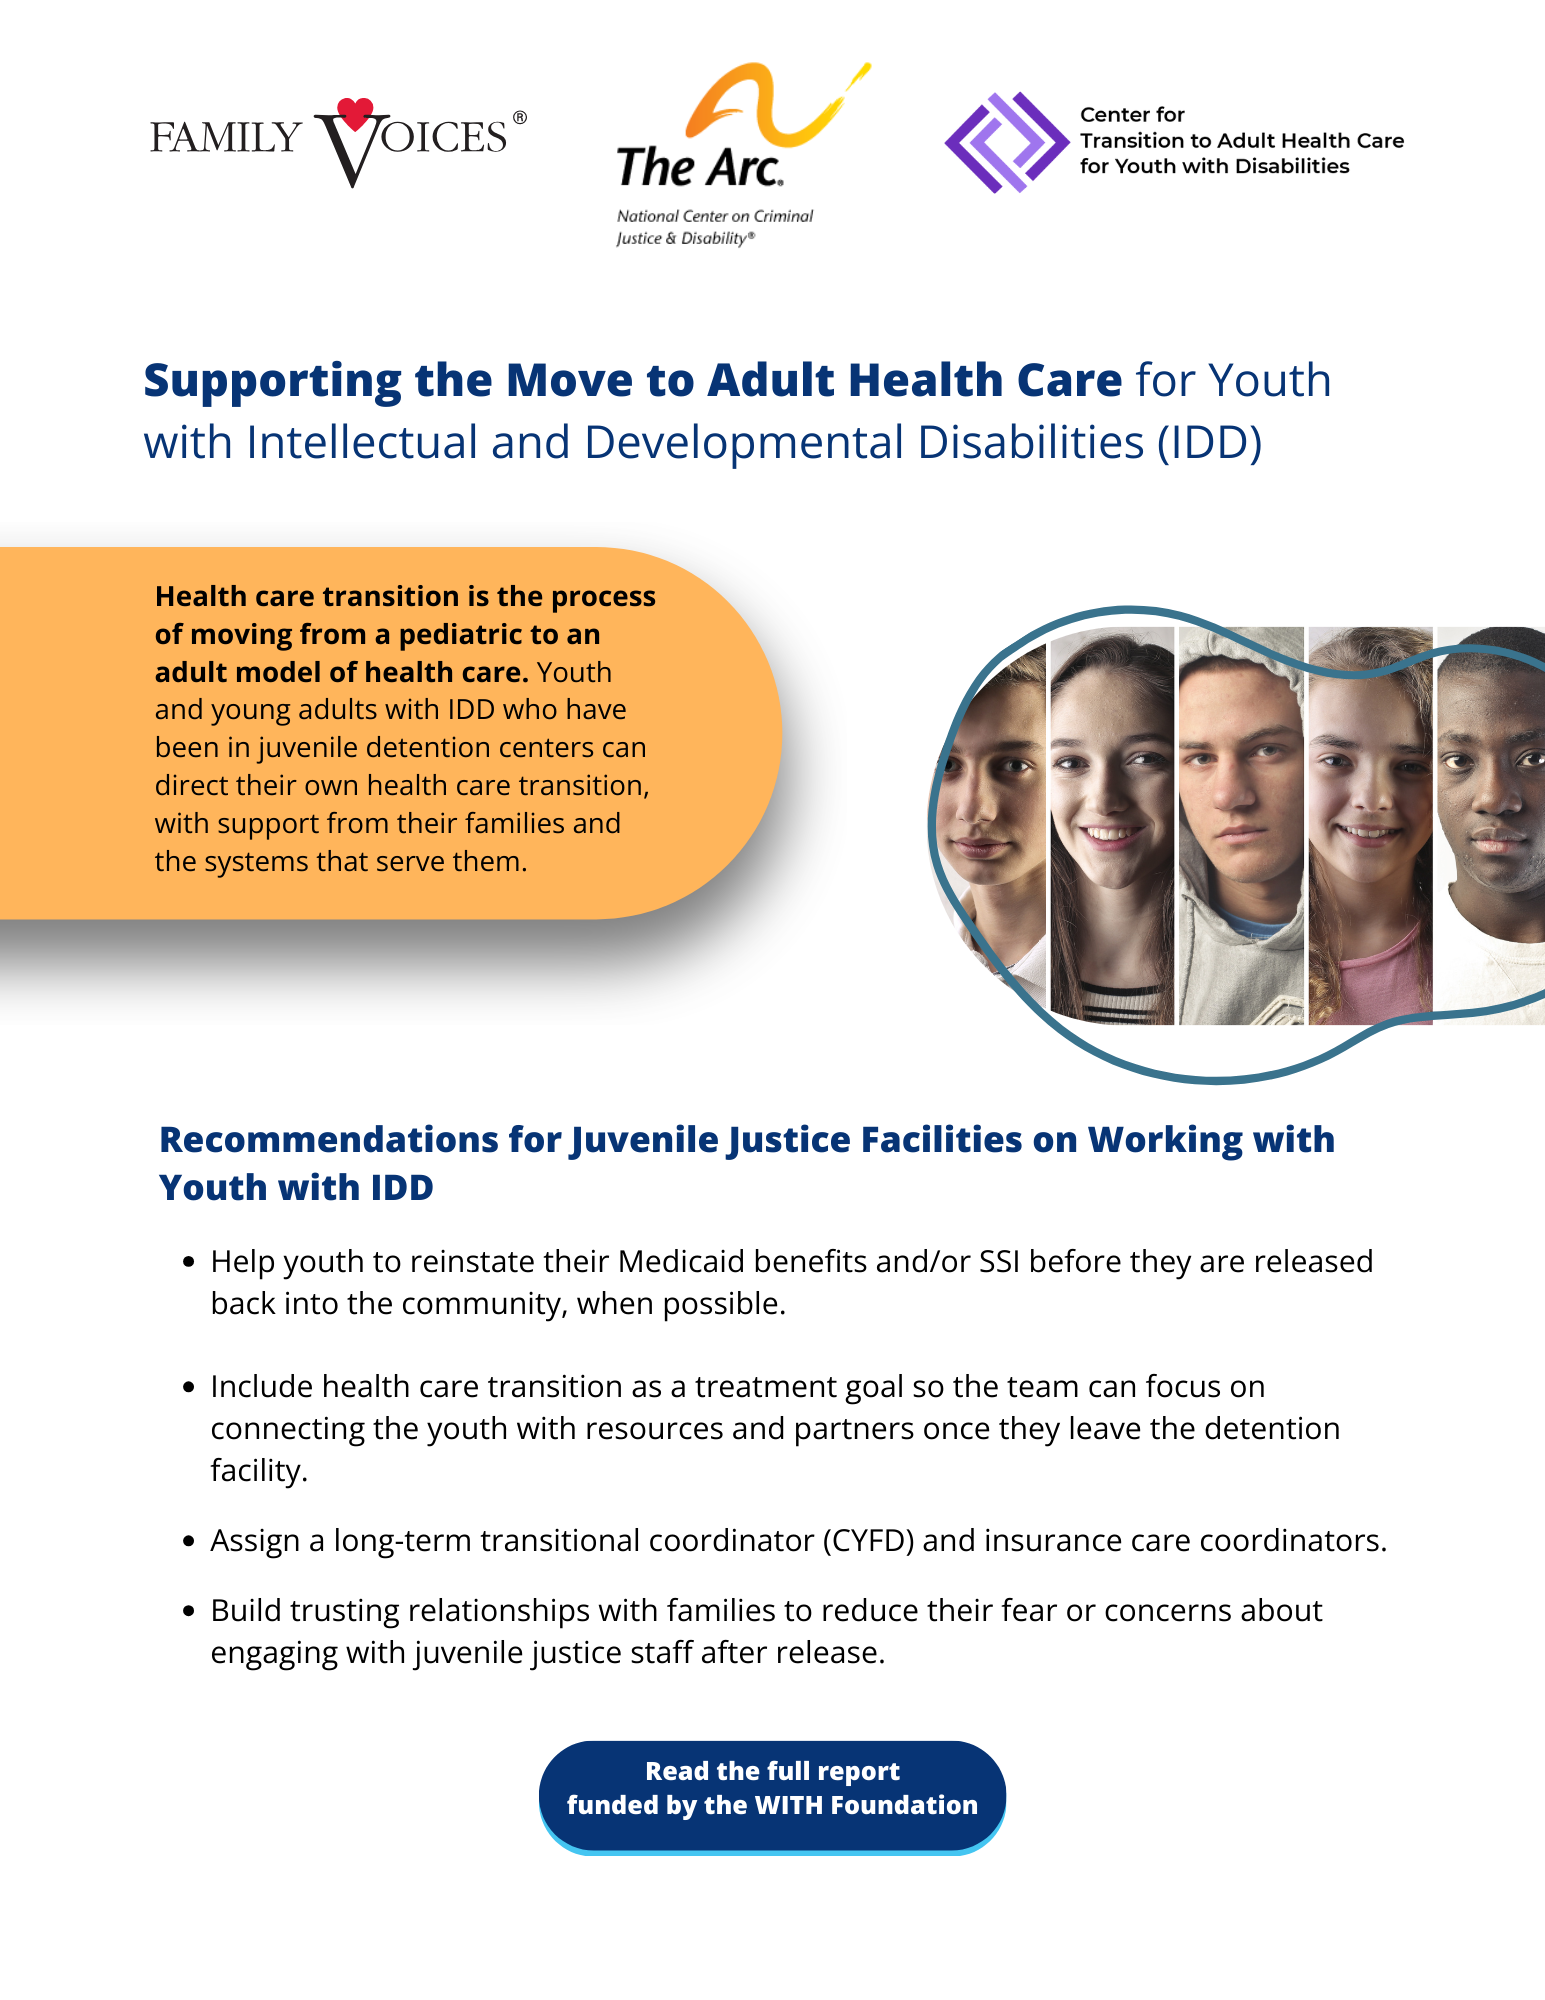 Cover page with a collage of profiles of youth, for the info brief about meeting the health care transition needs of youth with intellectual and developmental disabilities in the juvenile justice system.